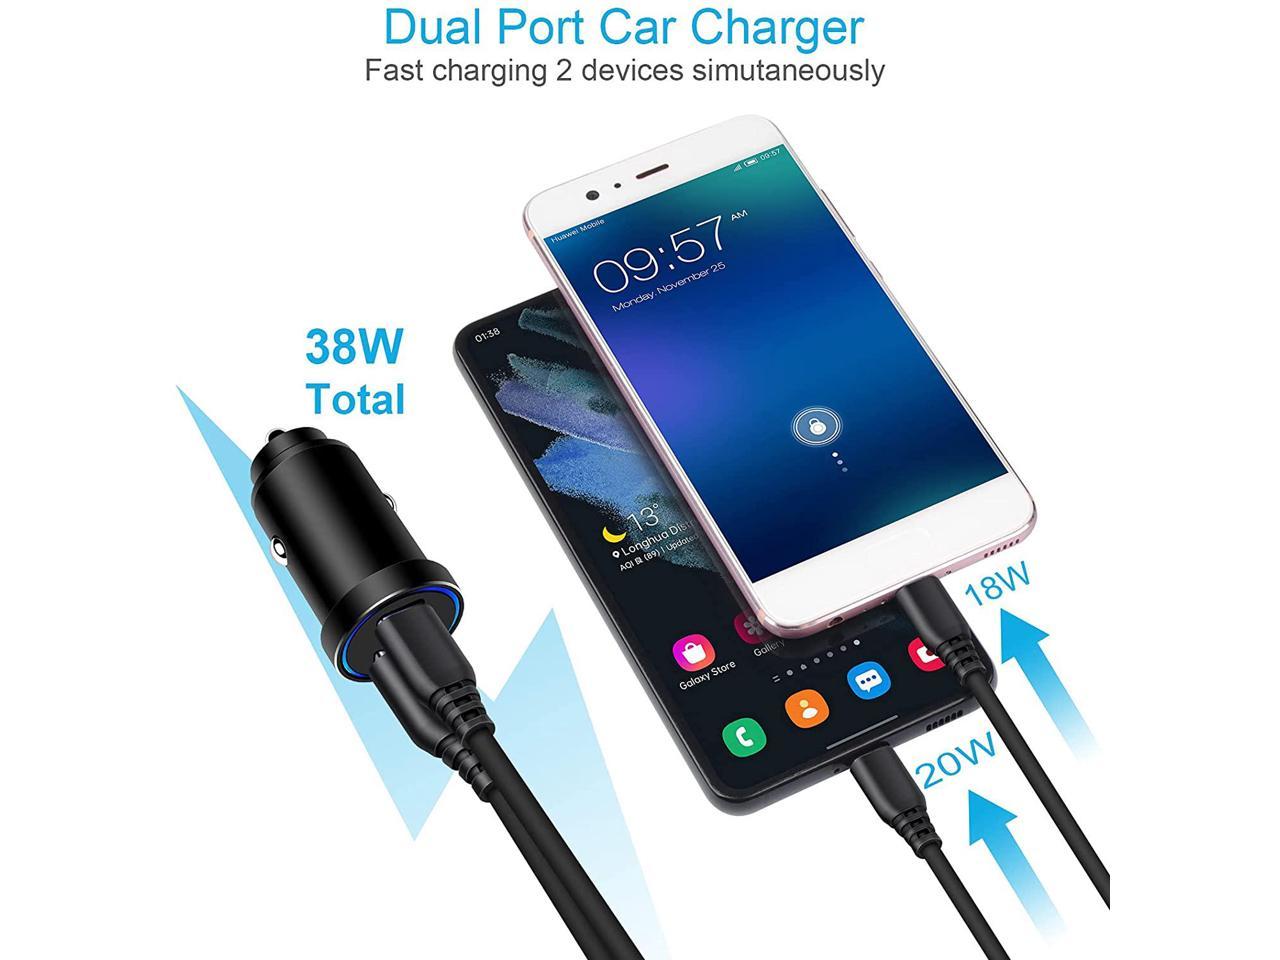 HUHUTA 38W Dual Port Fast Car Charger Adapter with PD&QC 3.0 Compatible with Samsung Galaxy S21/S20/S20 FE/S10/S9/Note 20 iPhone 12/12 Pro/12 Mini/11/11 Pro/XR/XS USB C Car Charger 6ft Type C Cord 